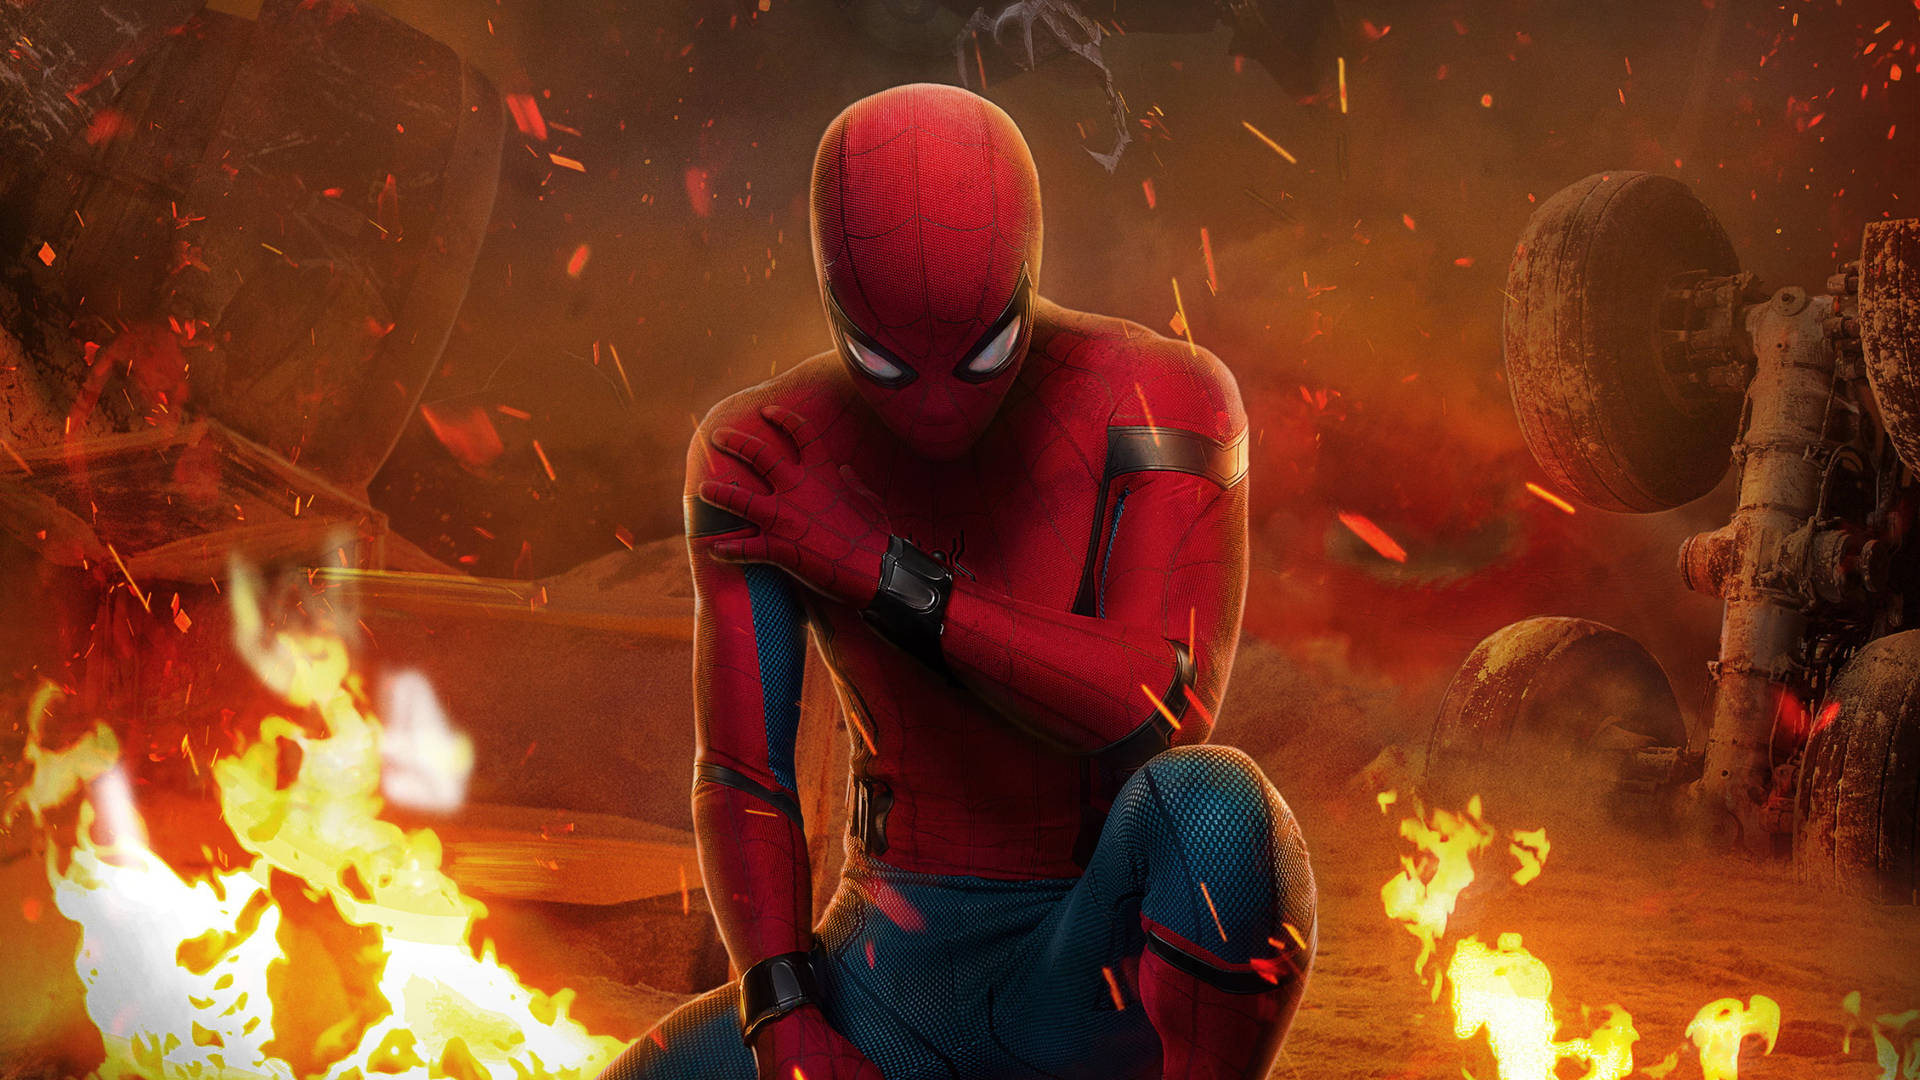 Spiderman Fights Against the Flames Wallpaper